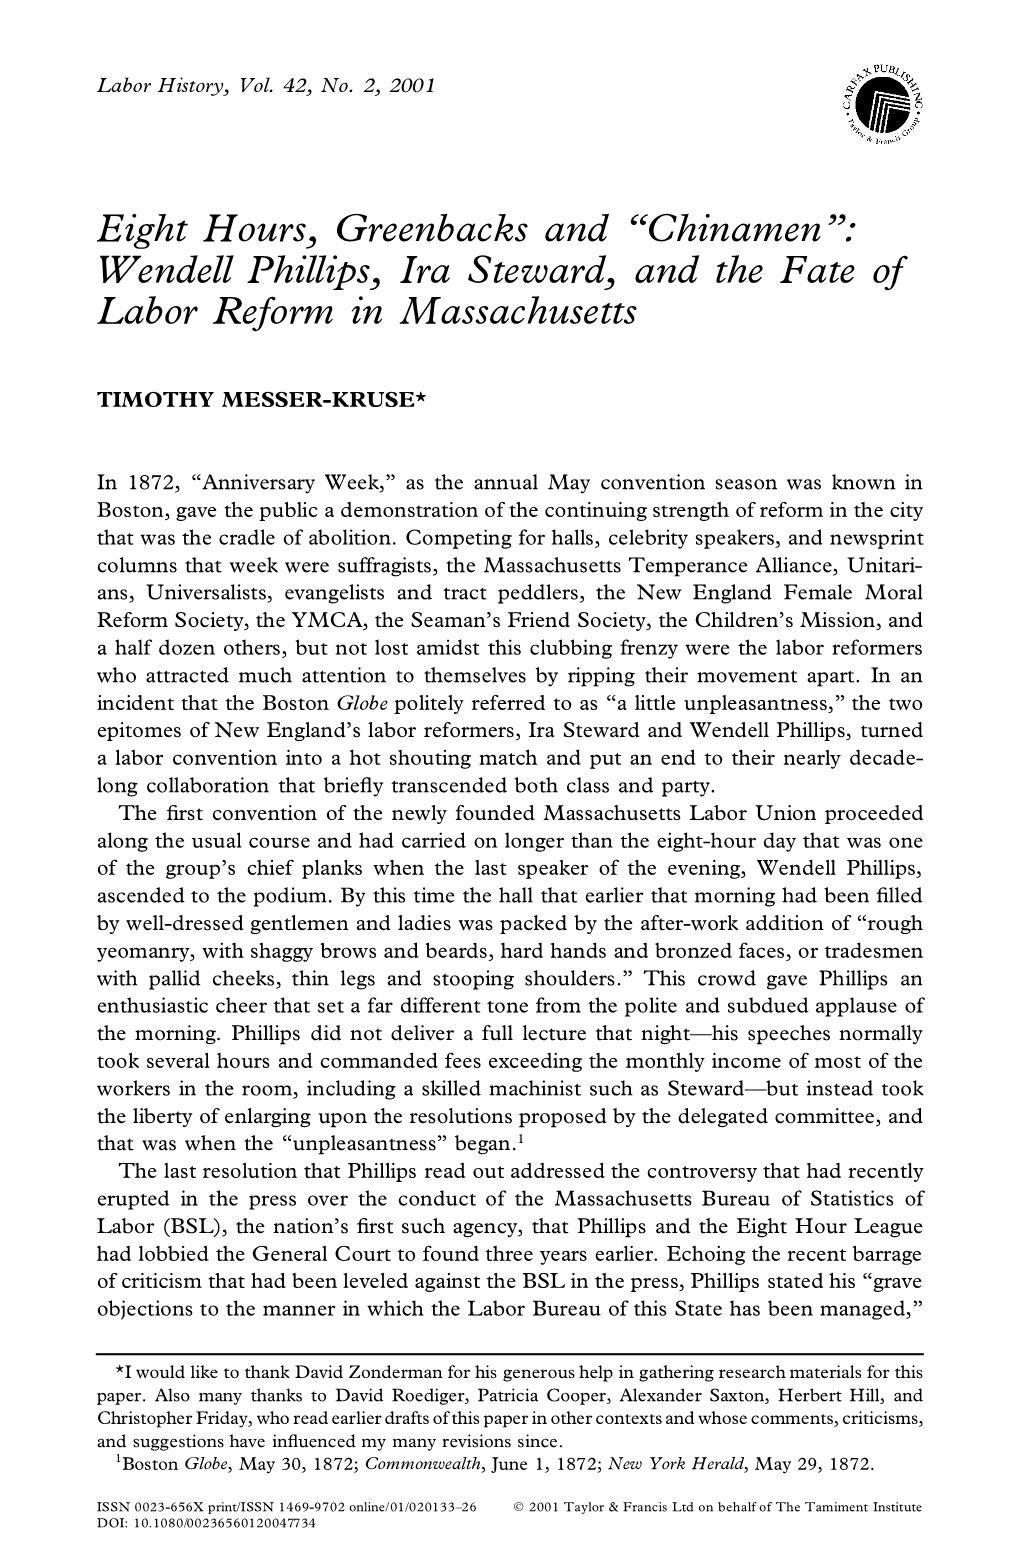 Wendell Phillips, Ira Steward, and the Fate of Labor Reform In